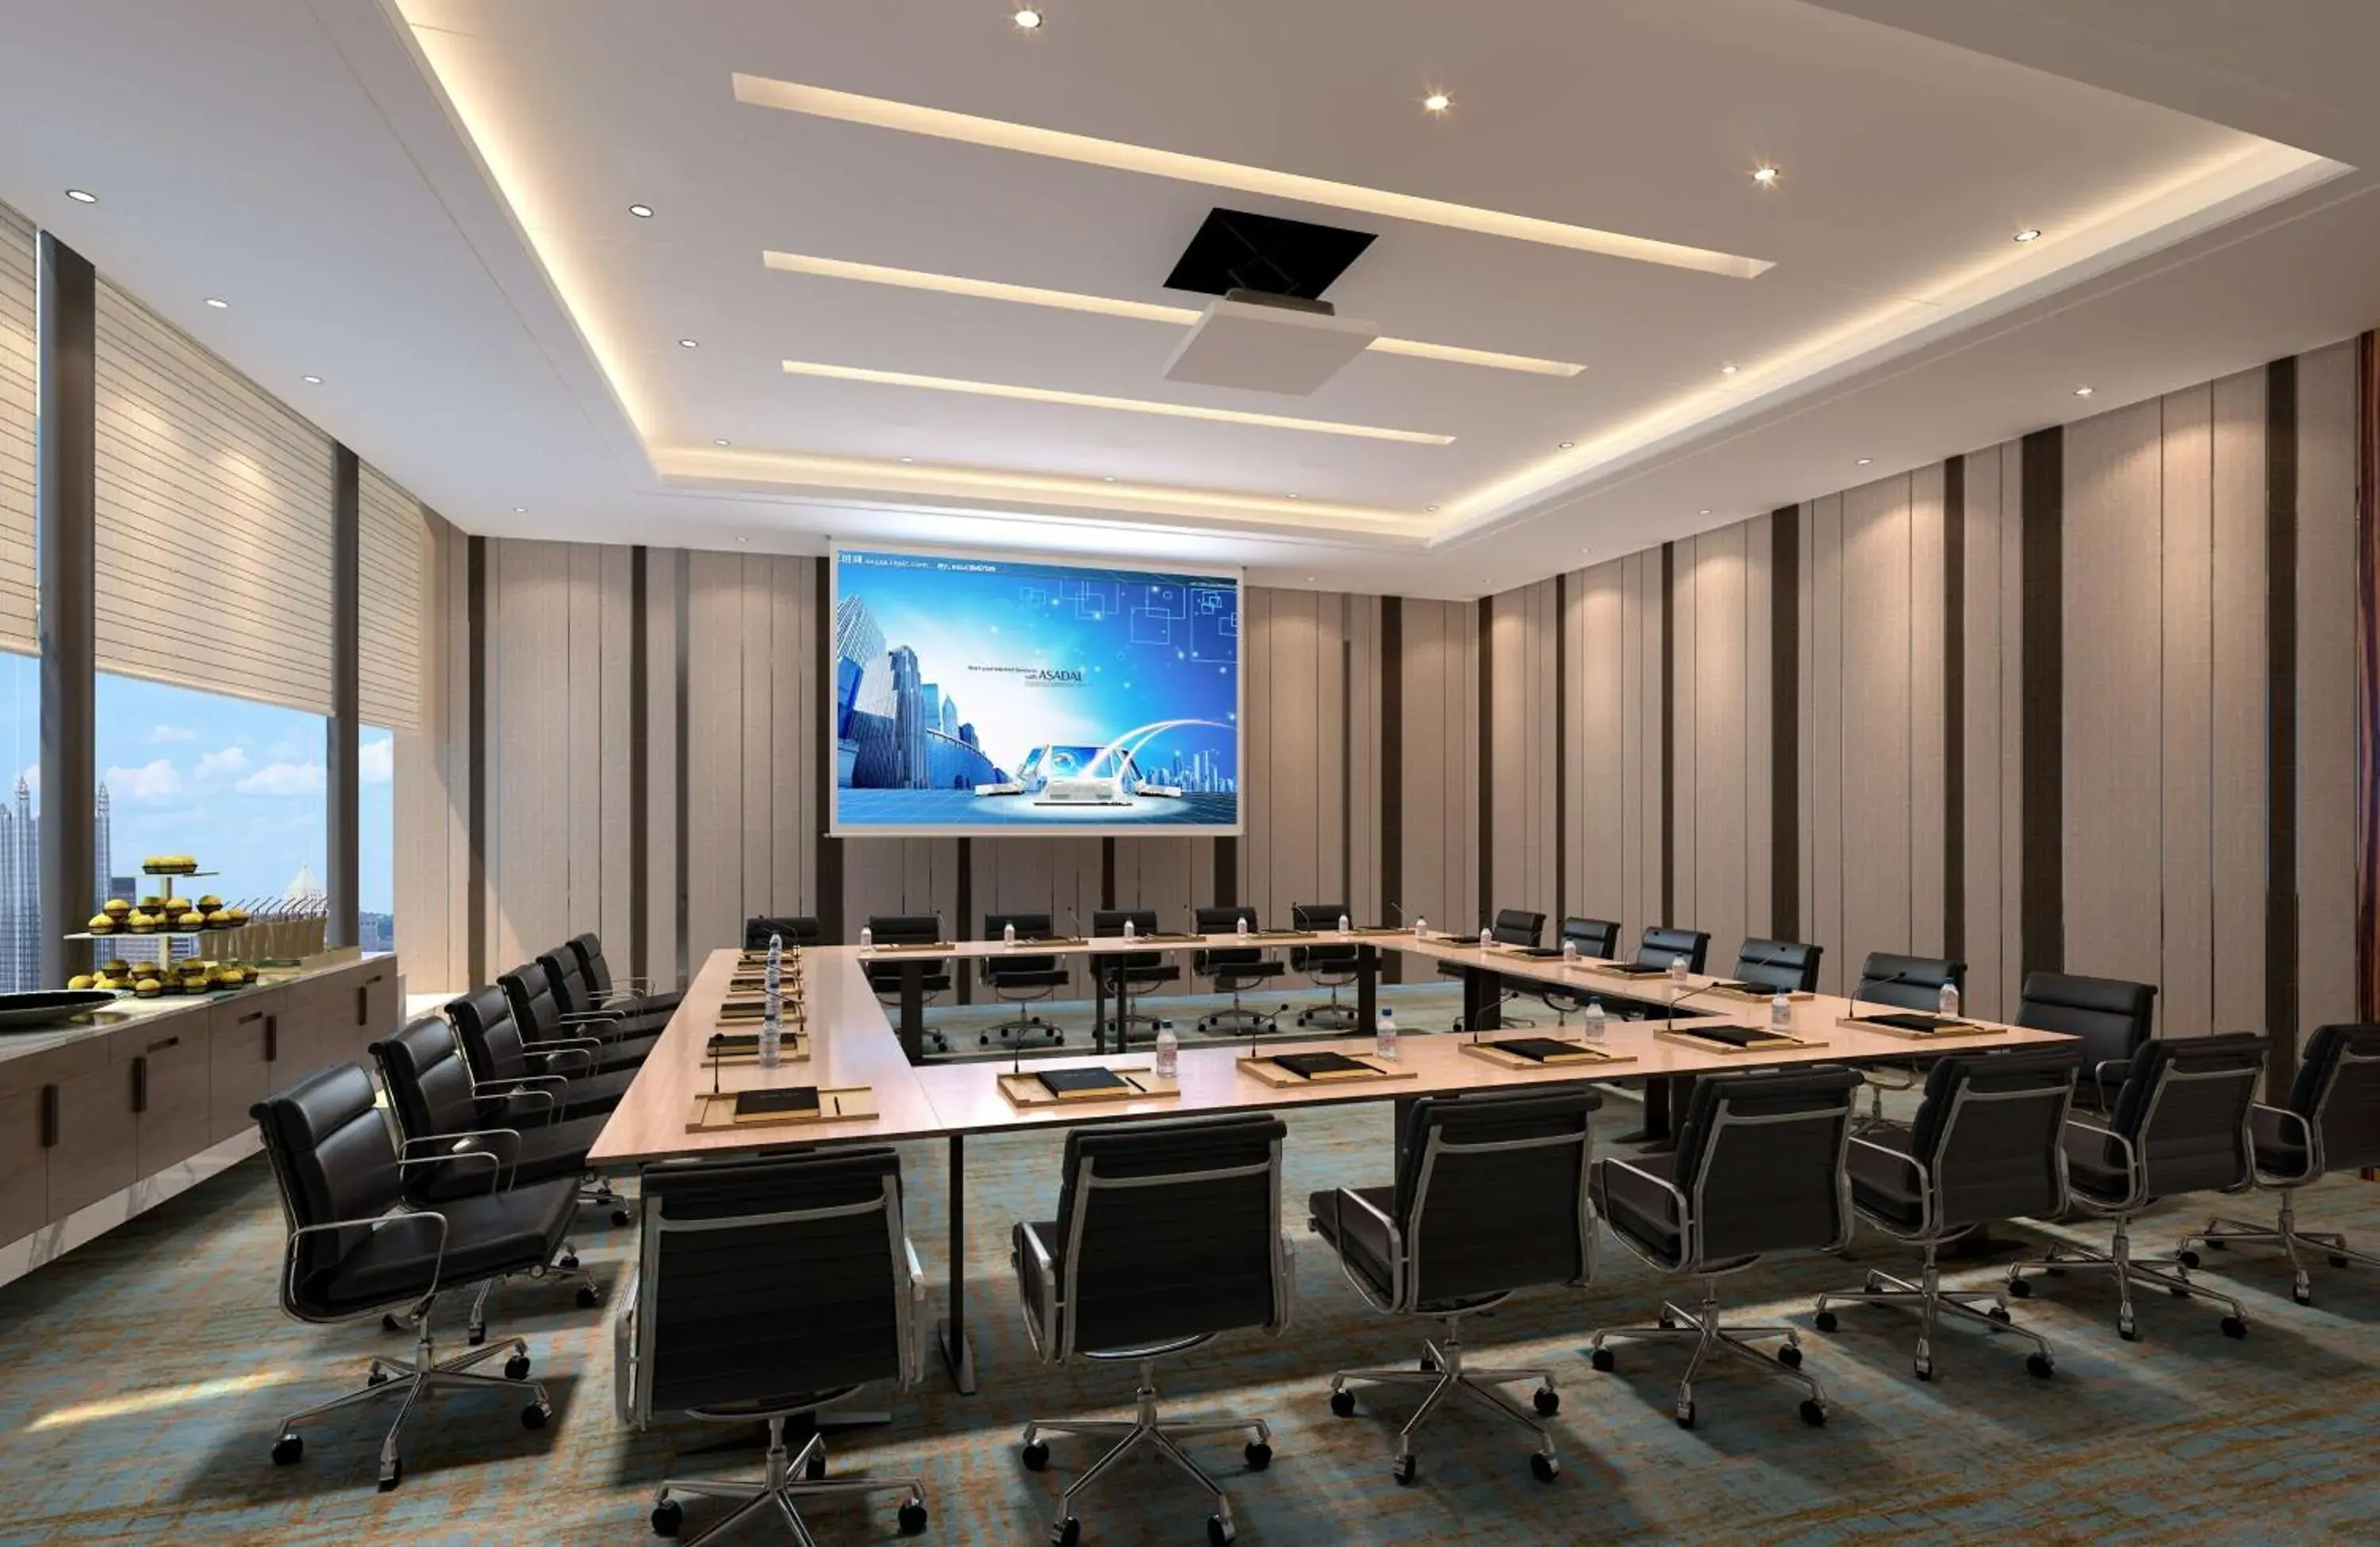 Meeting/conference room in Hilton Garden Inn Guiyang, China